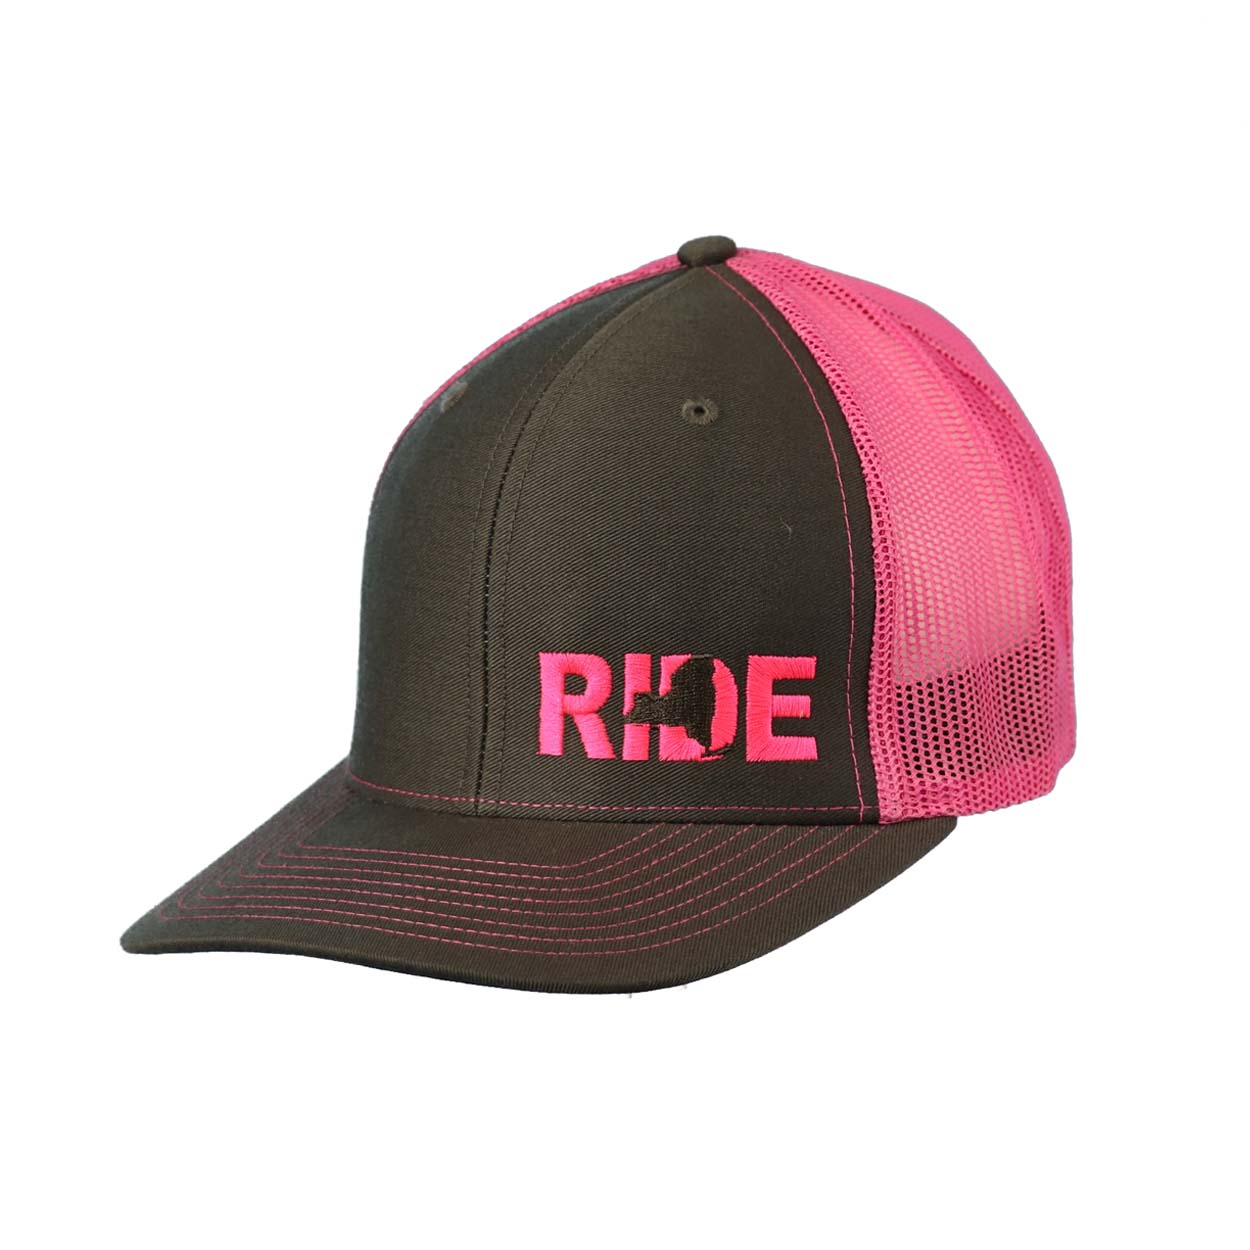 Ride New York Night Out Embroidered Snapback Trucker Hat Gray/Pink